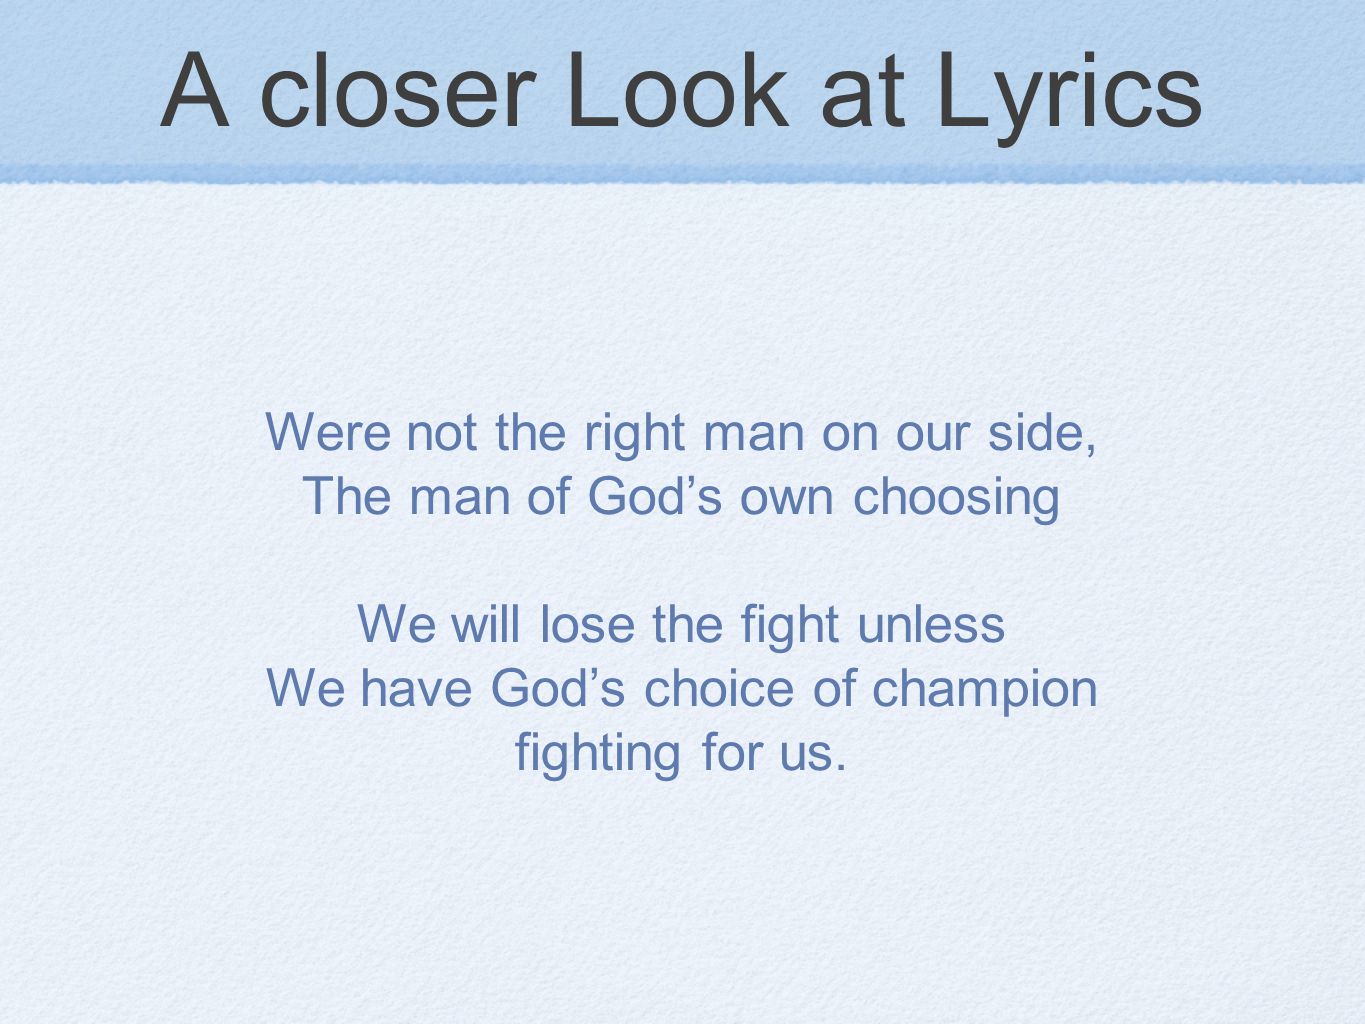 A closer Look at Lyrics Were not the right man on our side, The man of God’s own choosing We will lose the fight unless We have God’s choice of champion fighting for us.